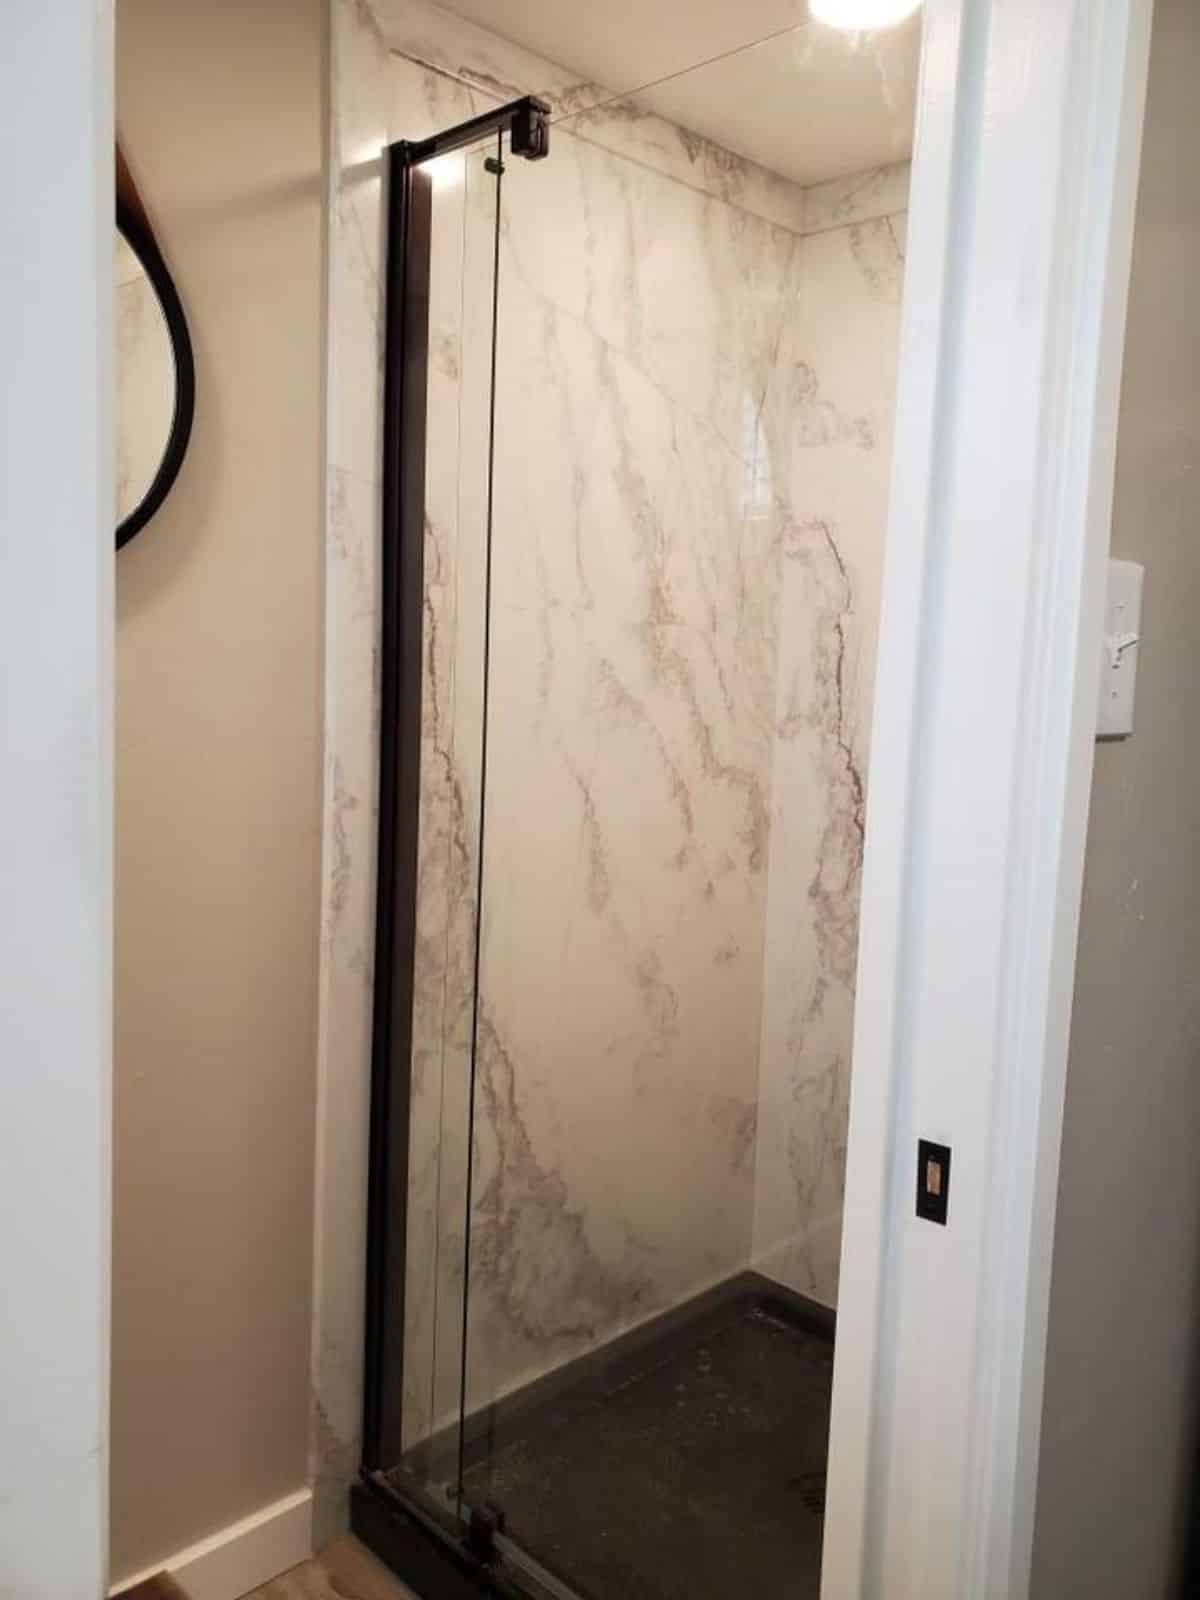 full length shower area with glass enclosure